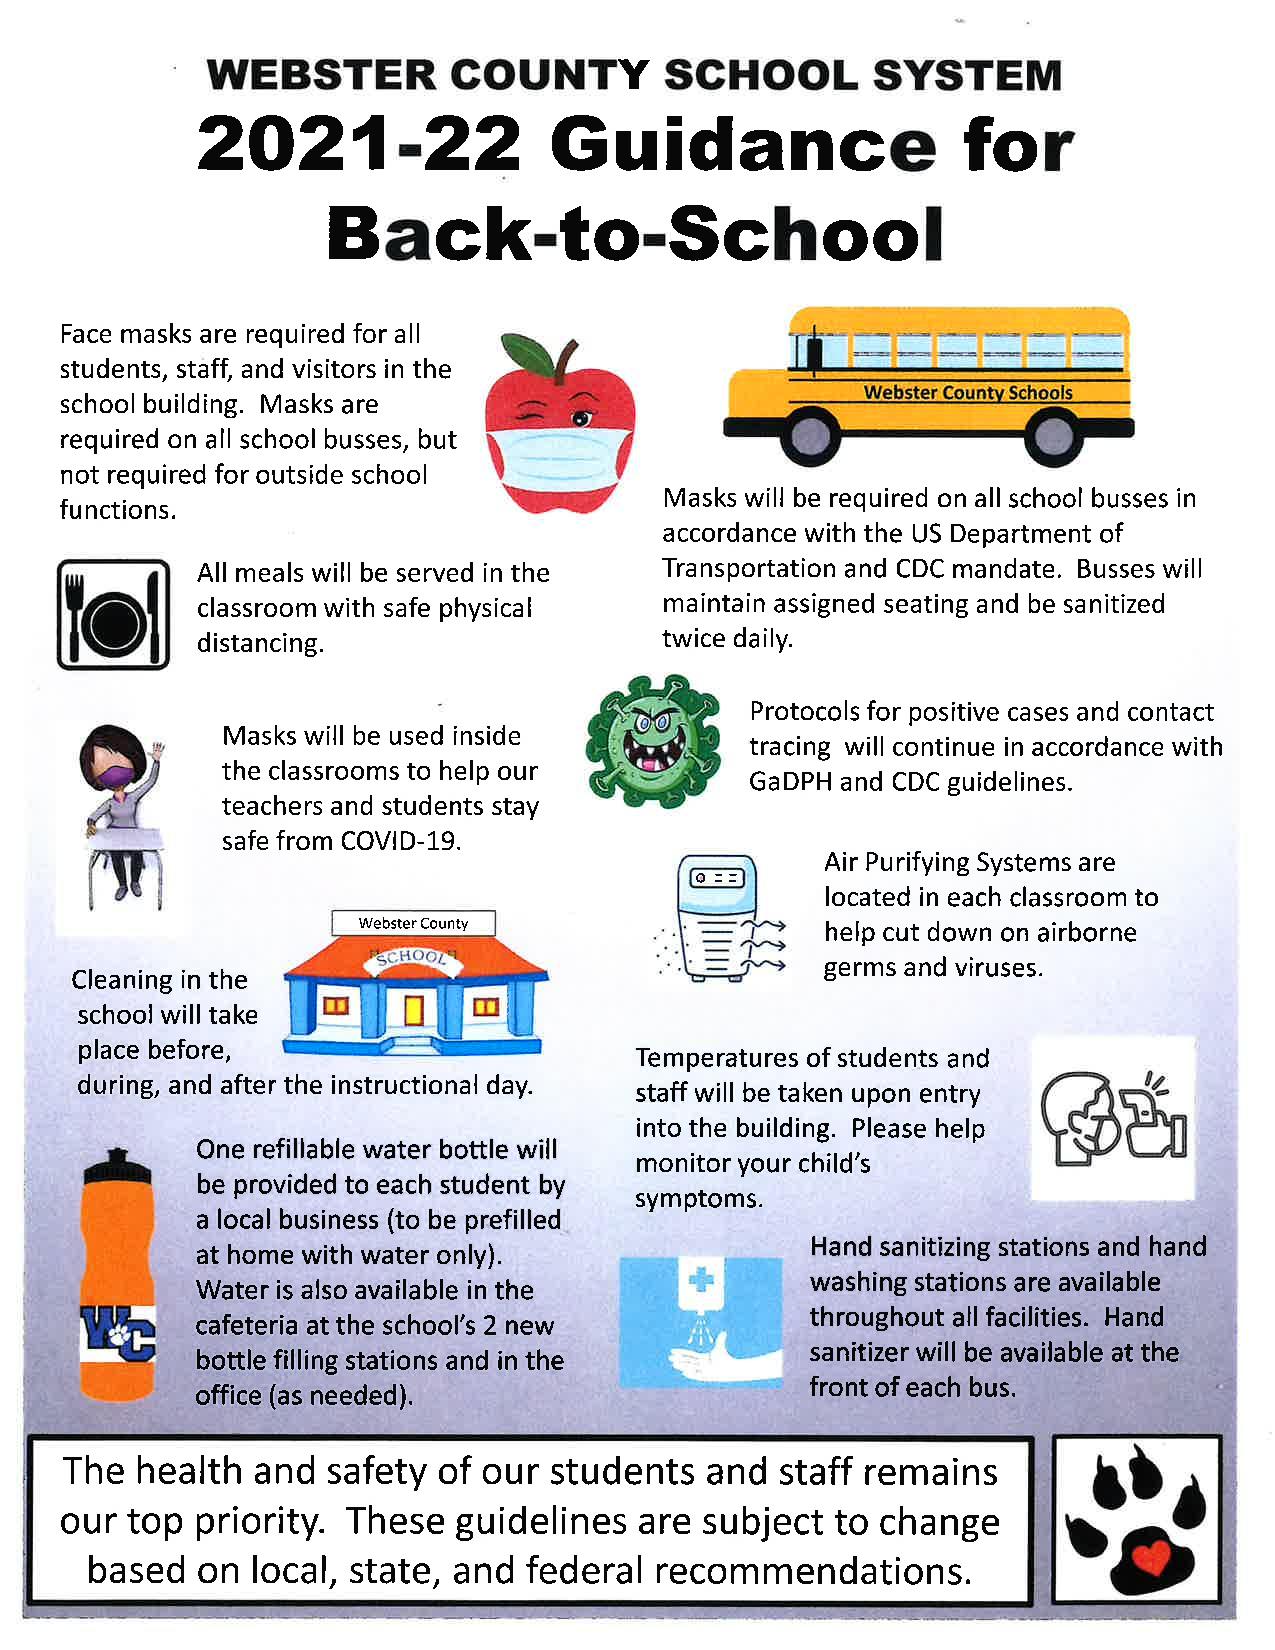 Webster County School System 2021-22 Guidance for Back-to-School